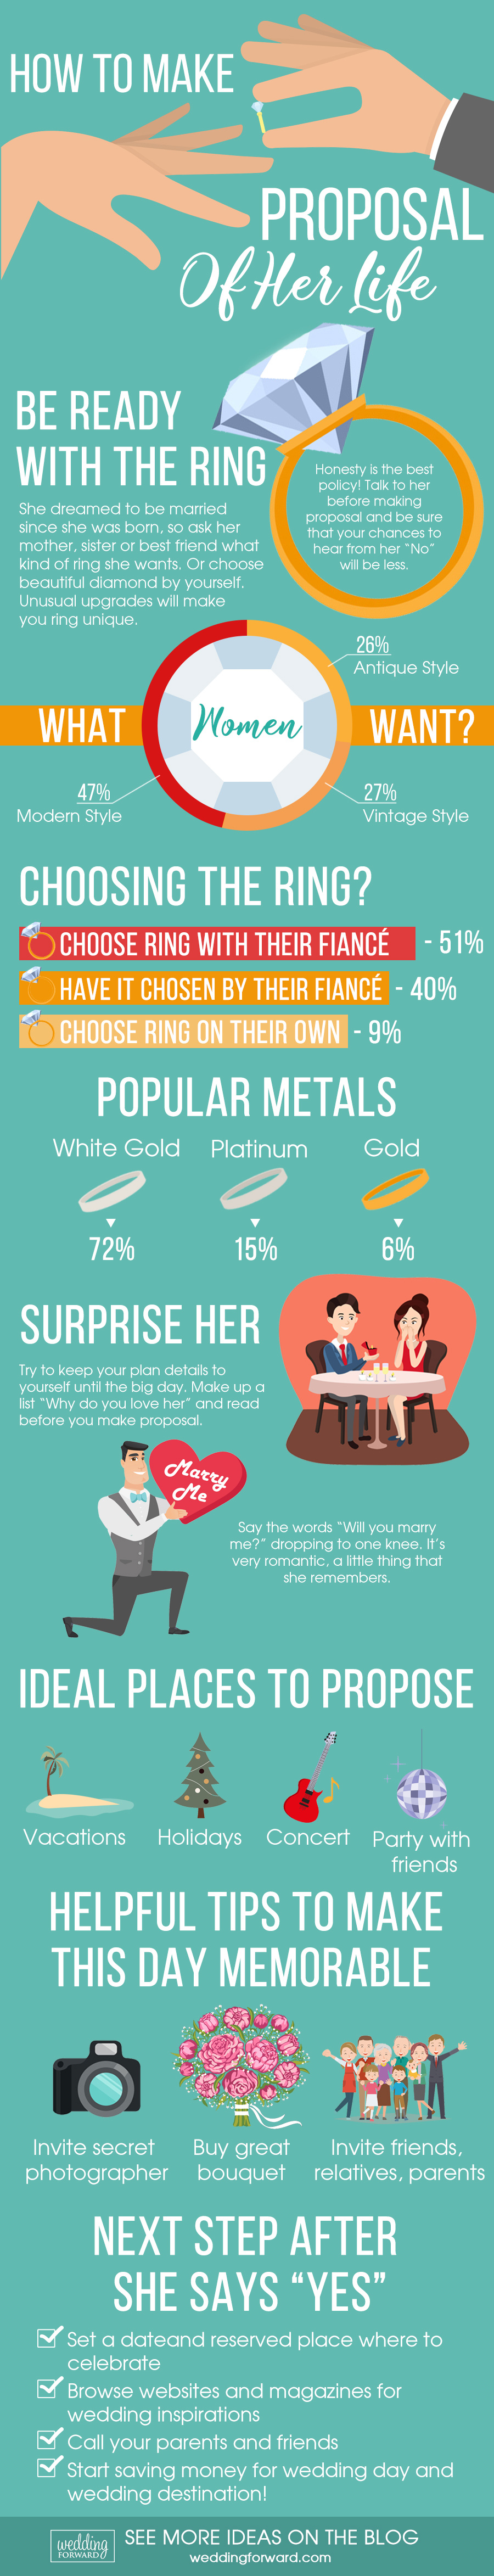 marriage proposal infographics how to make proposal of her life